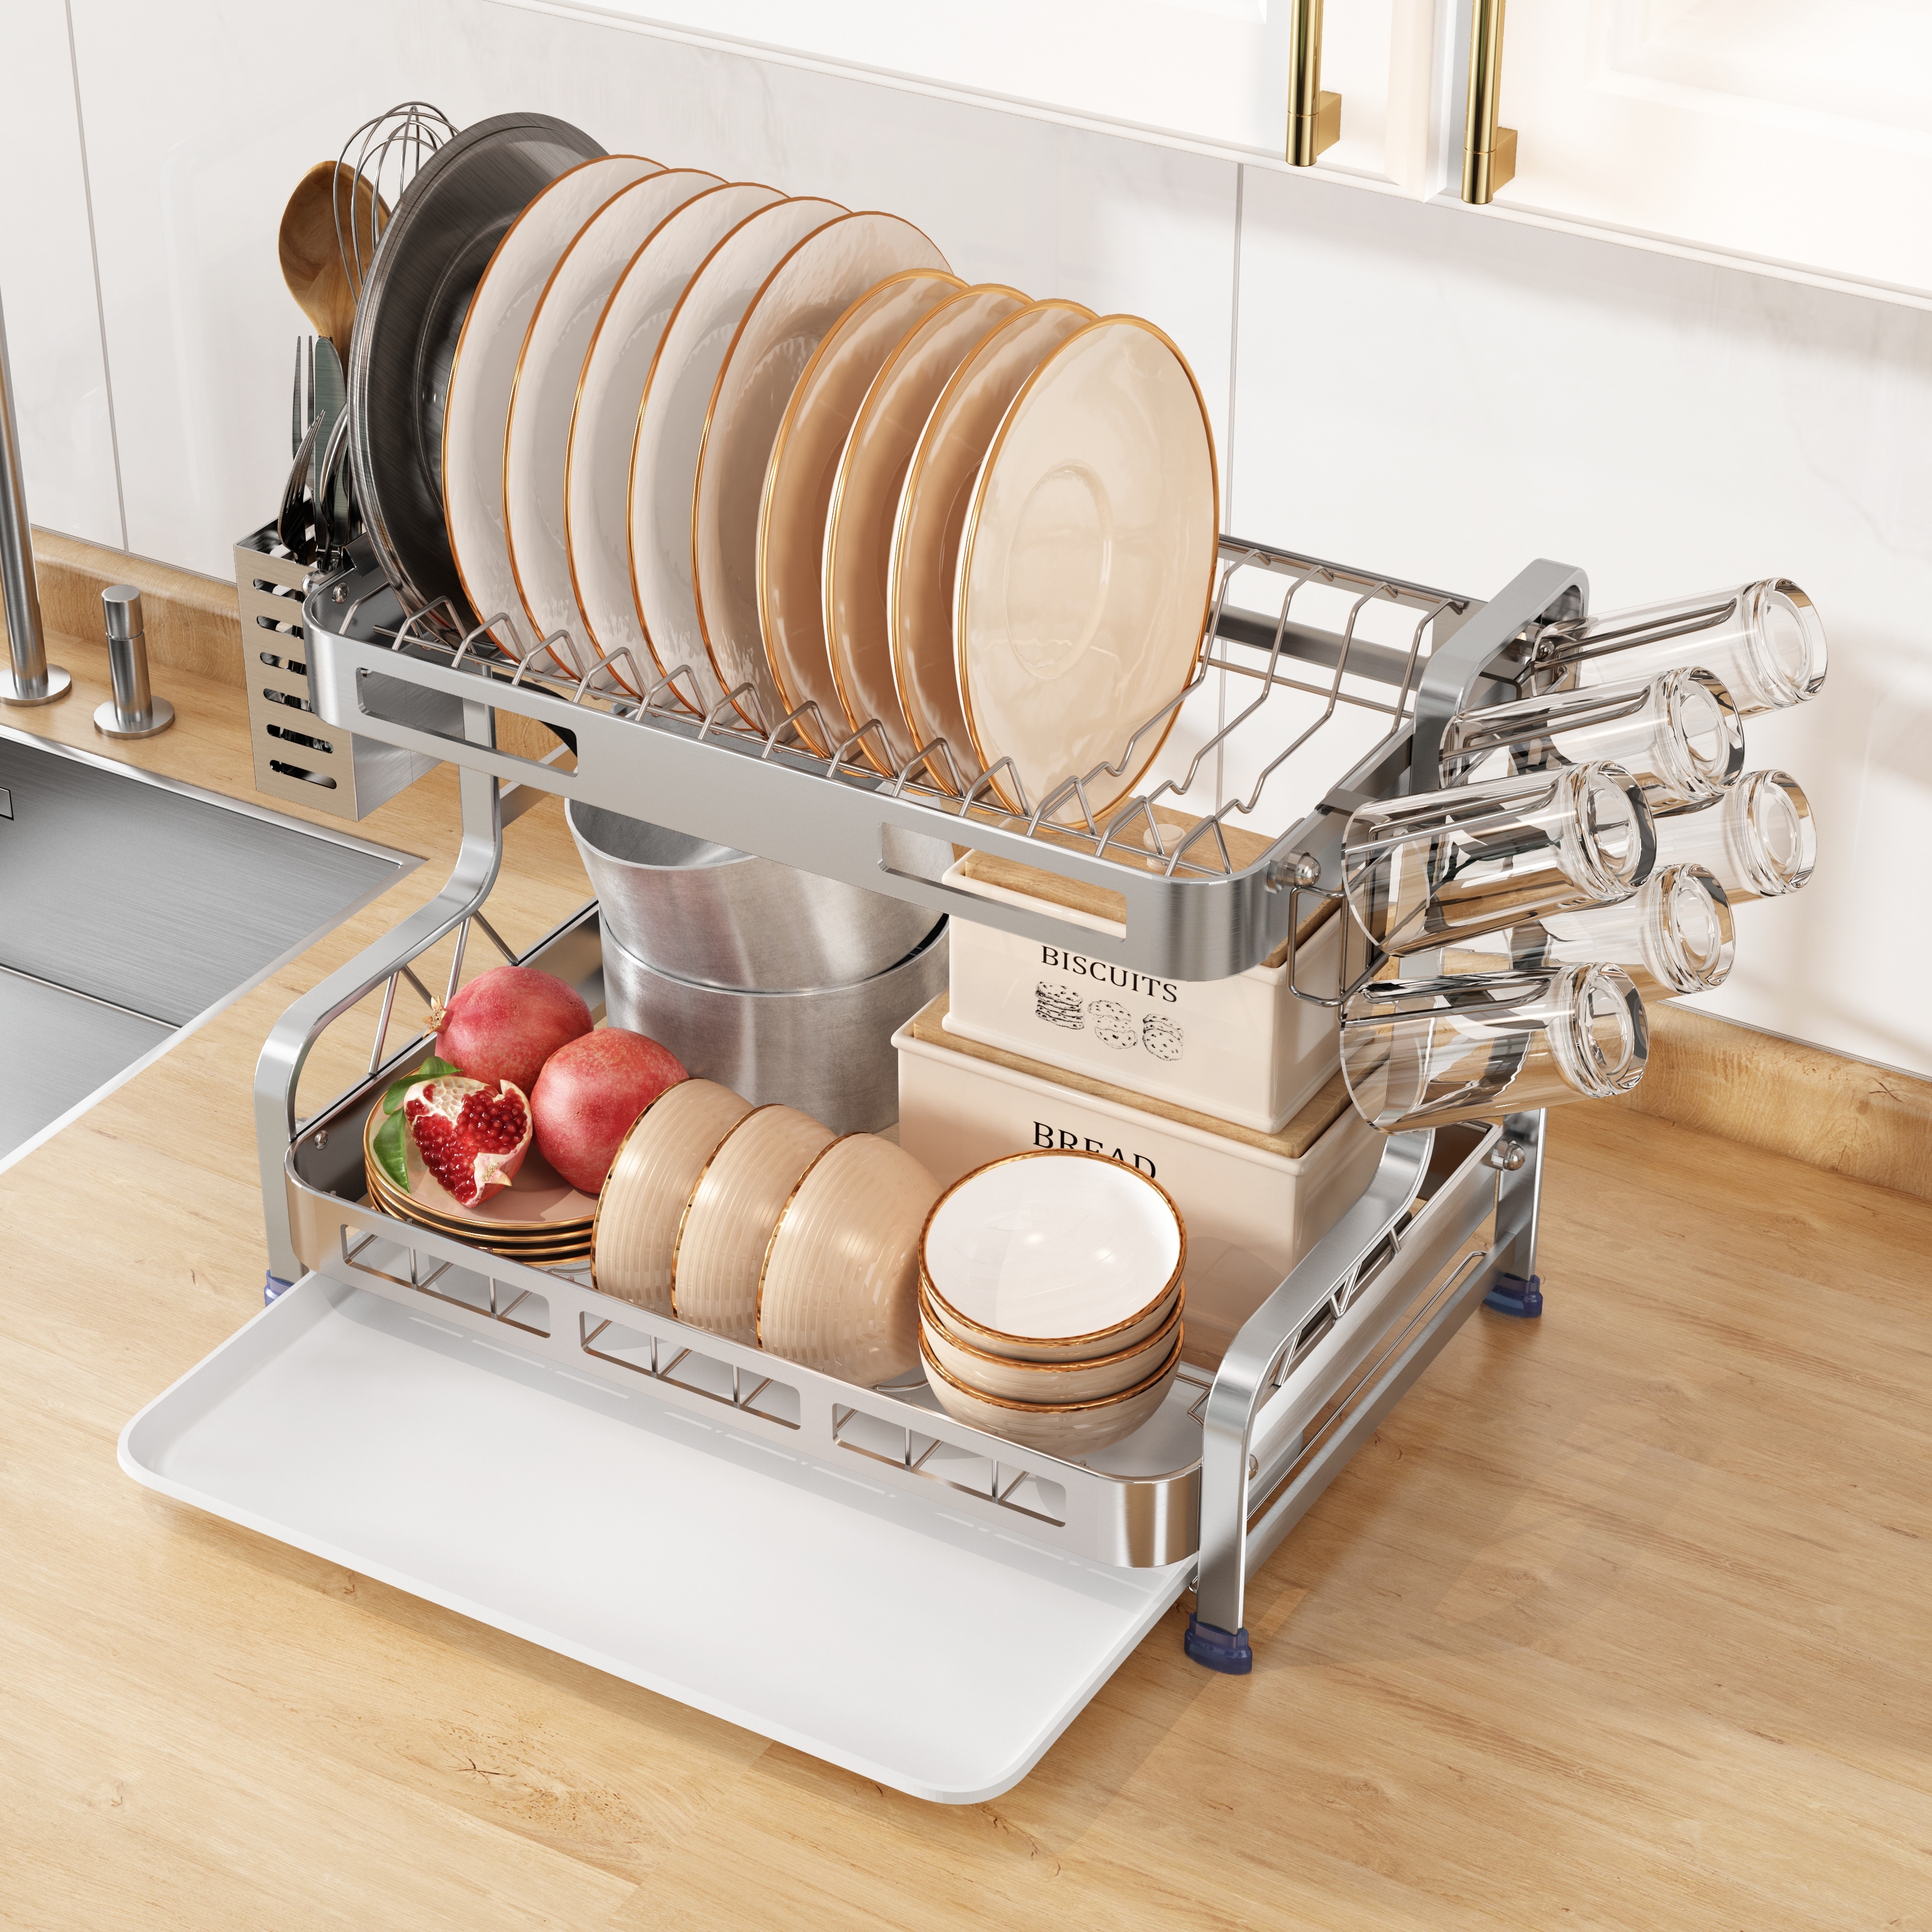 https://ak1.ostkcdn.com/images/products/is/images/direct/55d1b7604d42f613c7bdf0fc07ecbc9999852483/2-Tier-Kitchen-Stainless-Steel-Dish-Rack-with-Cutlery-Holder.jpg